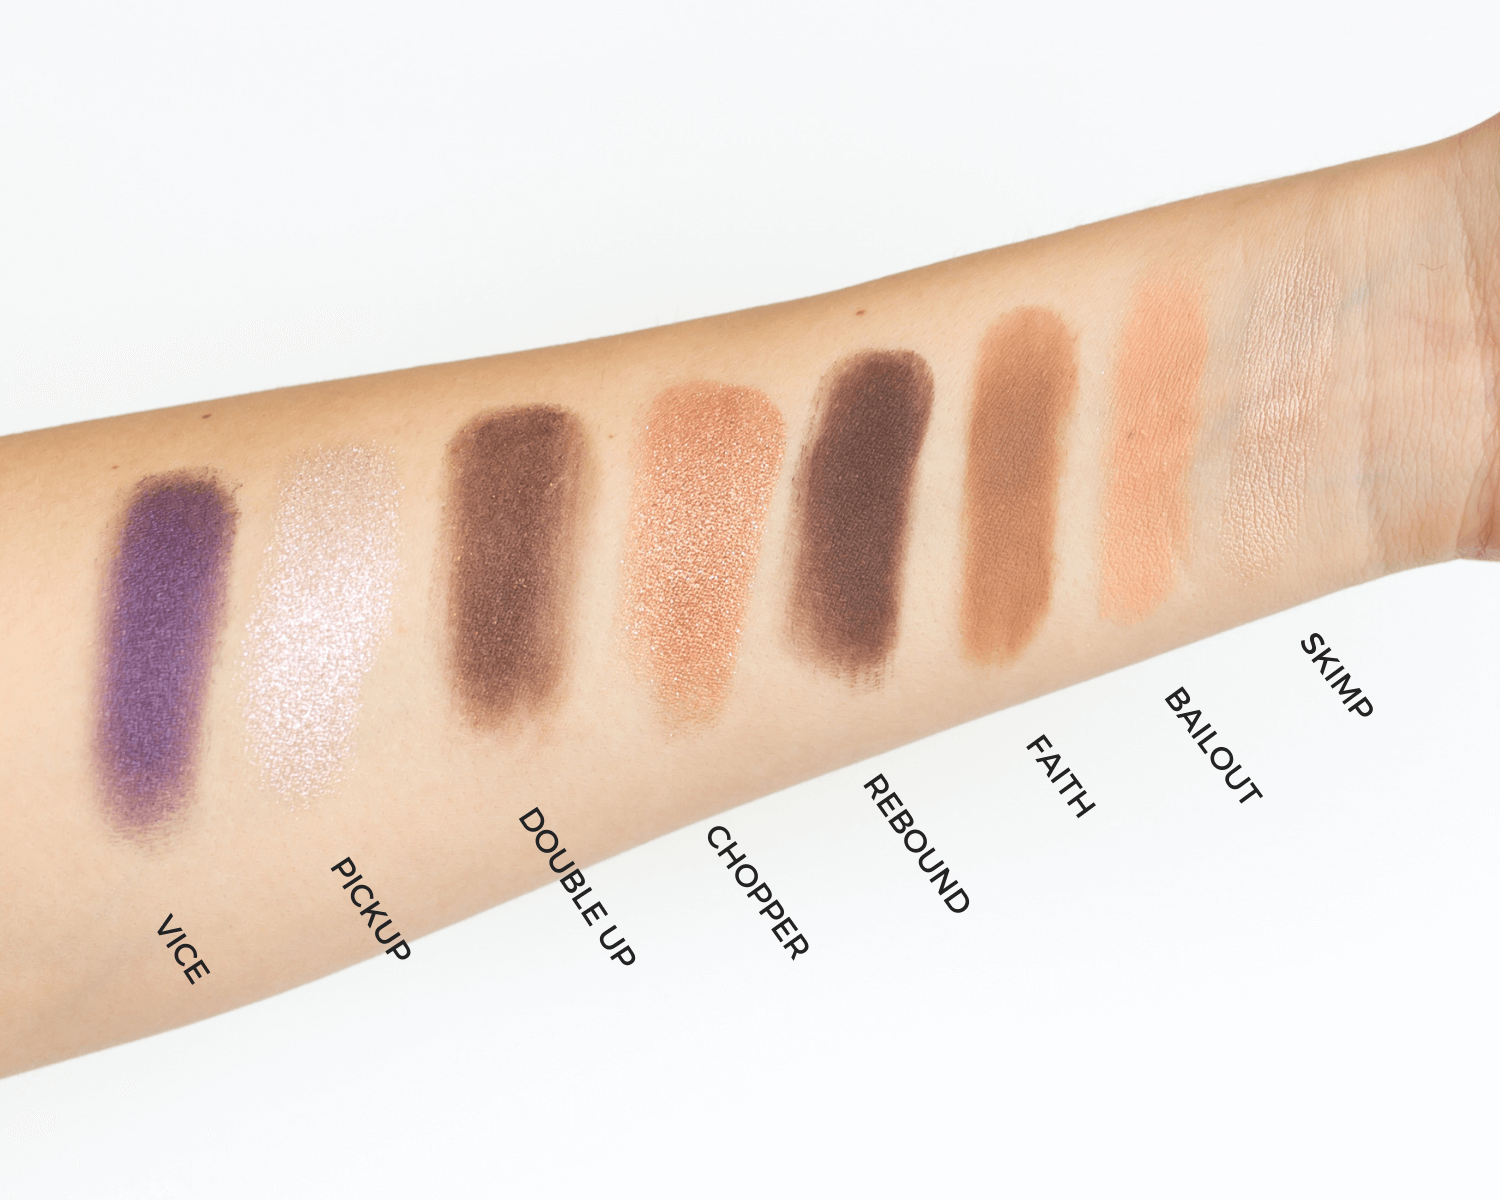 Urban Decay Bailout Palette Swatches | Twinspiration